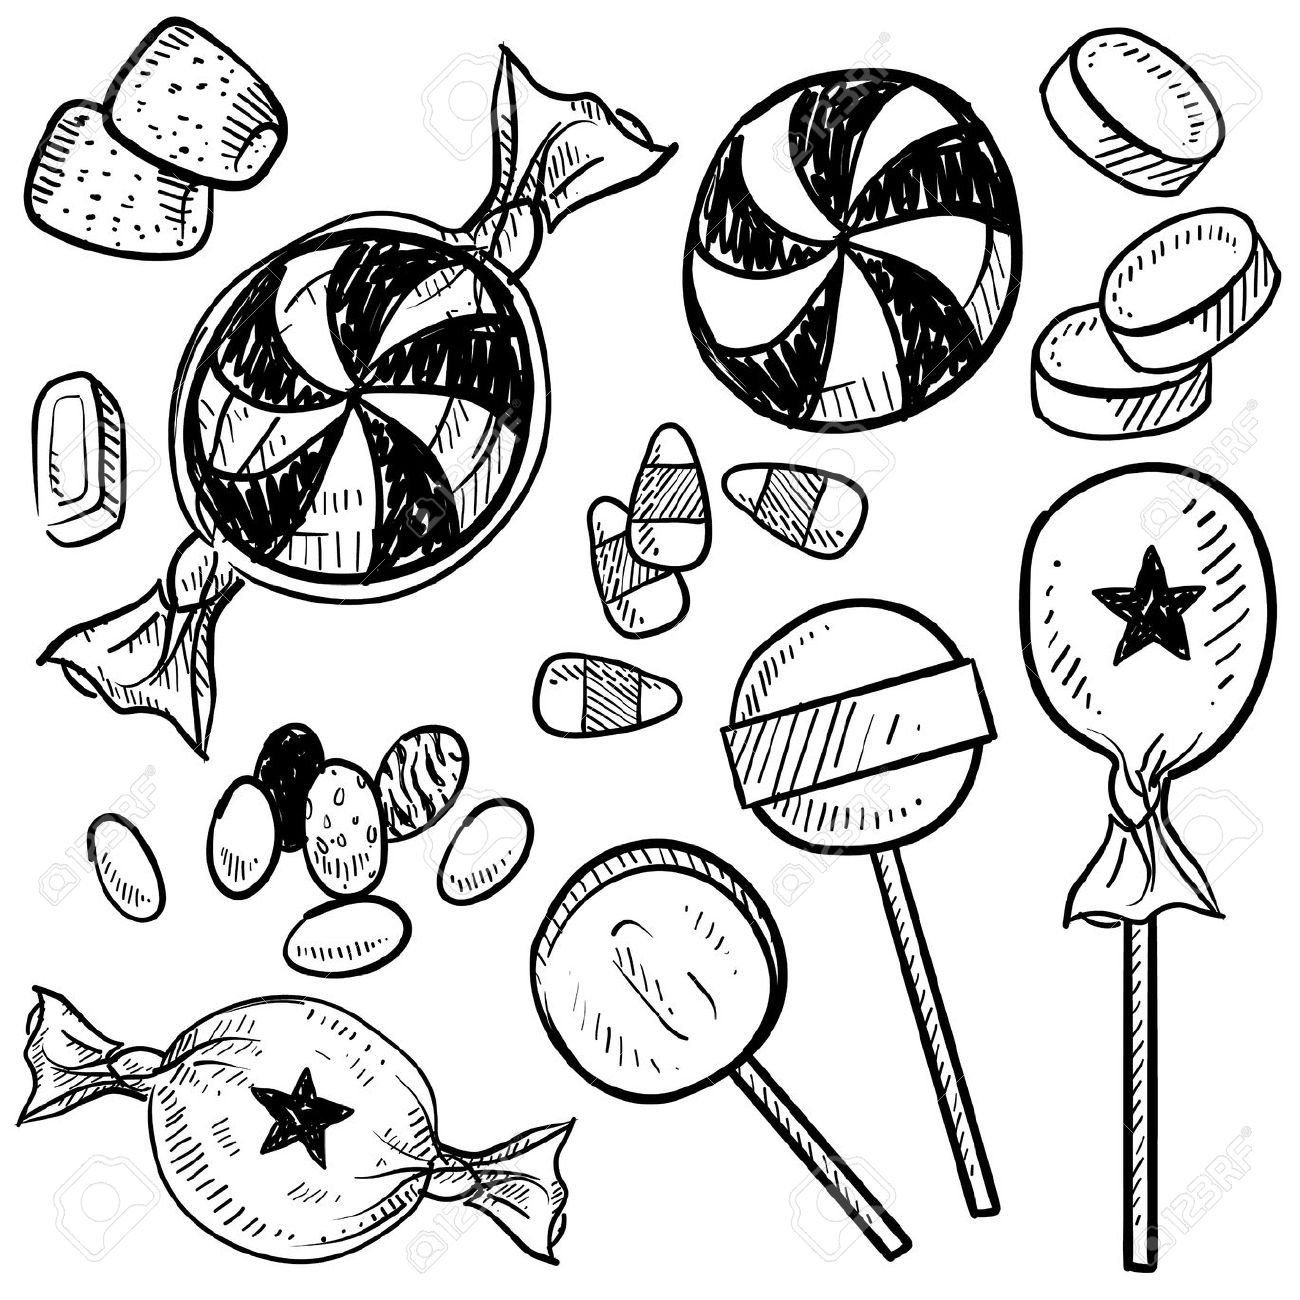 Candy Clipart Black And White & Candy Black And White Clip Art.